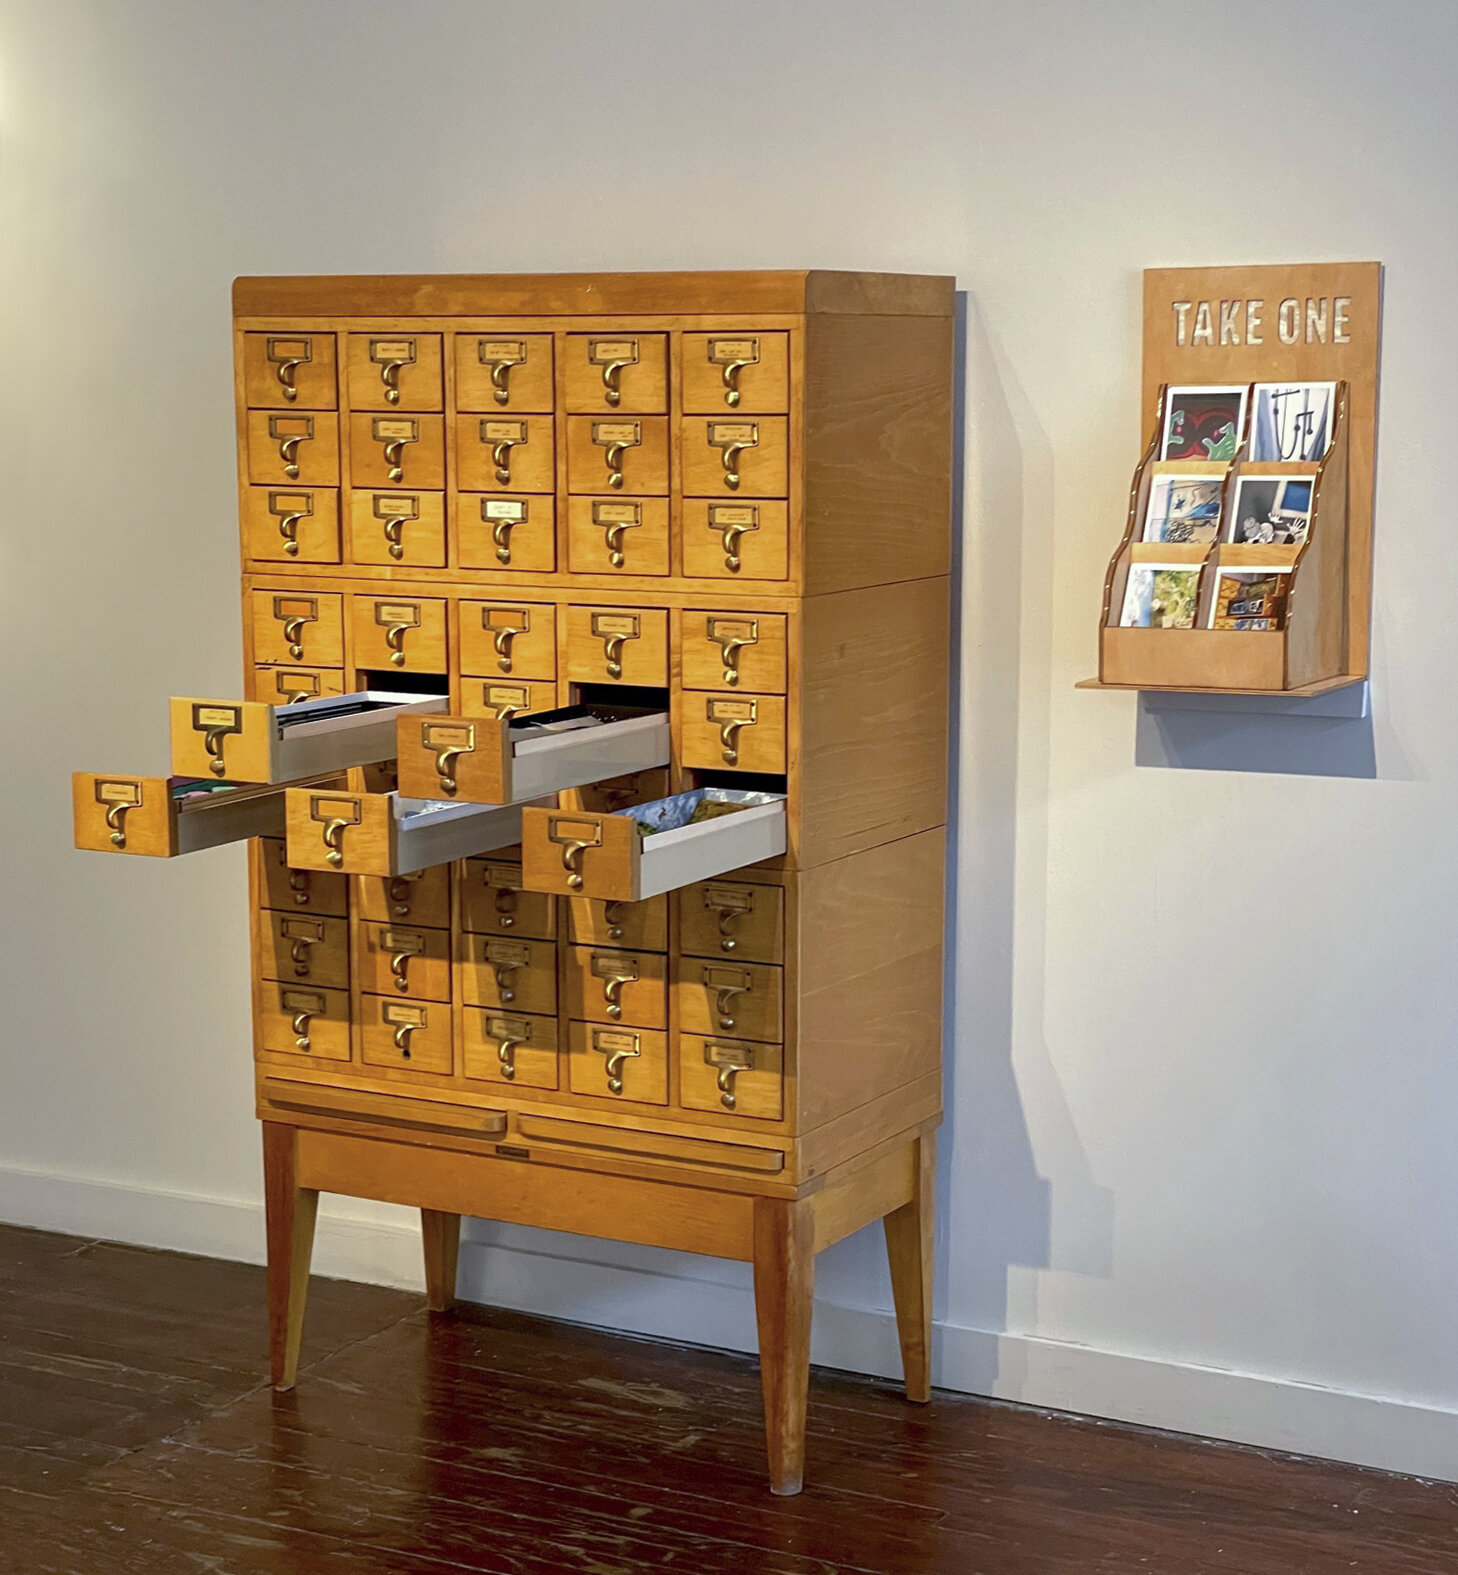    KELLEY BELL AND MELISSA PENLEY CORMIER      The Yonder Cabinet   Mixed media 